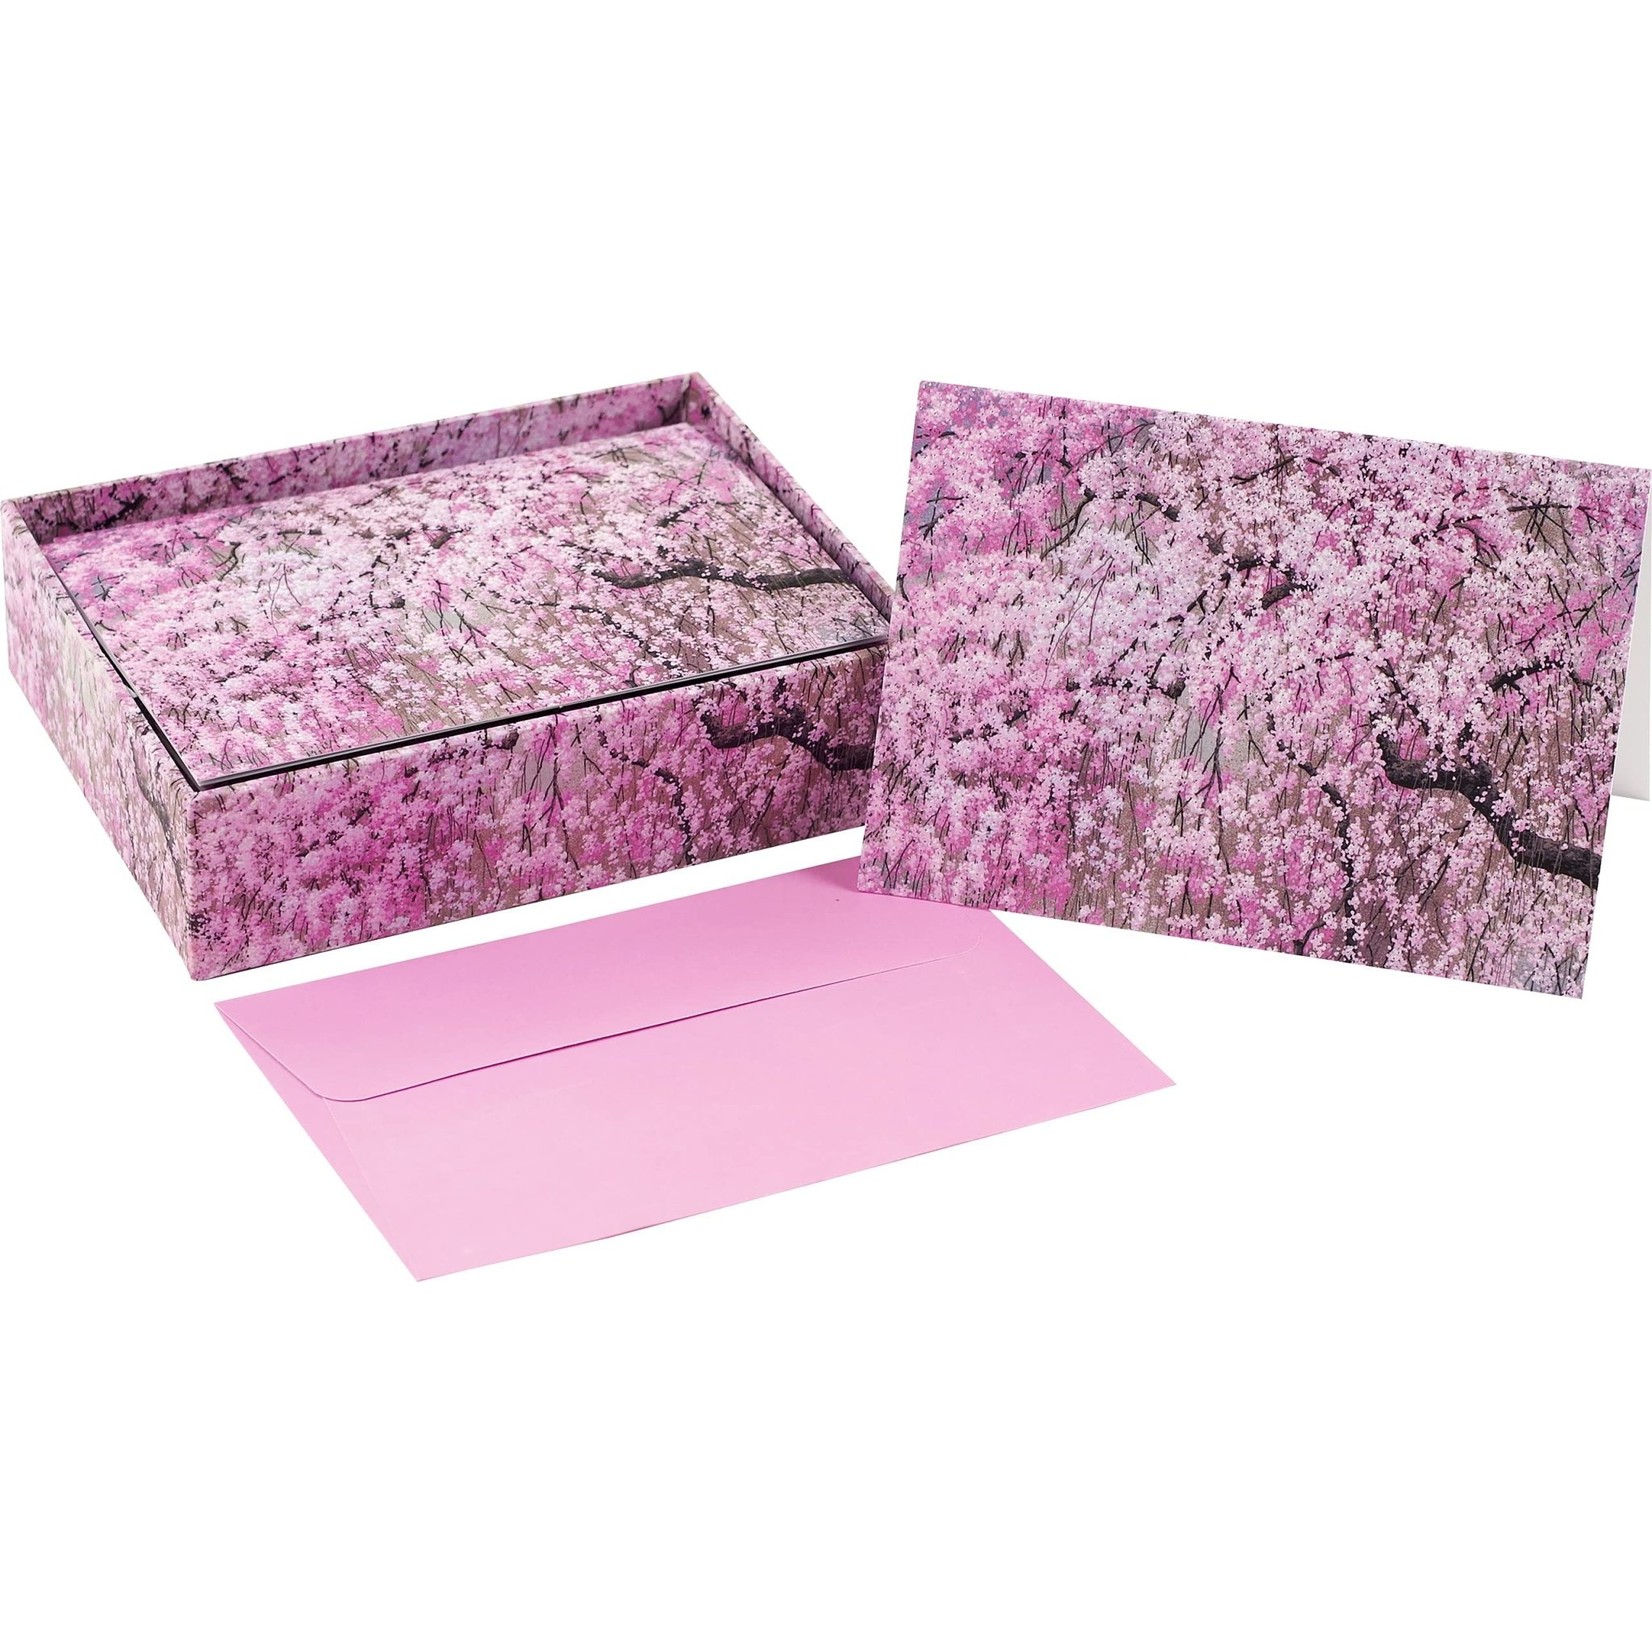 Peter Pauper Press Boxed Note Cards: Cherry Blossoms